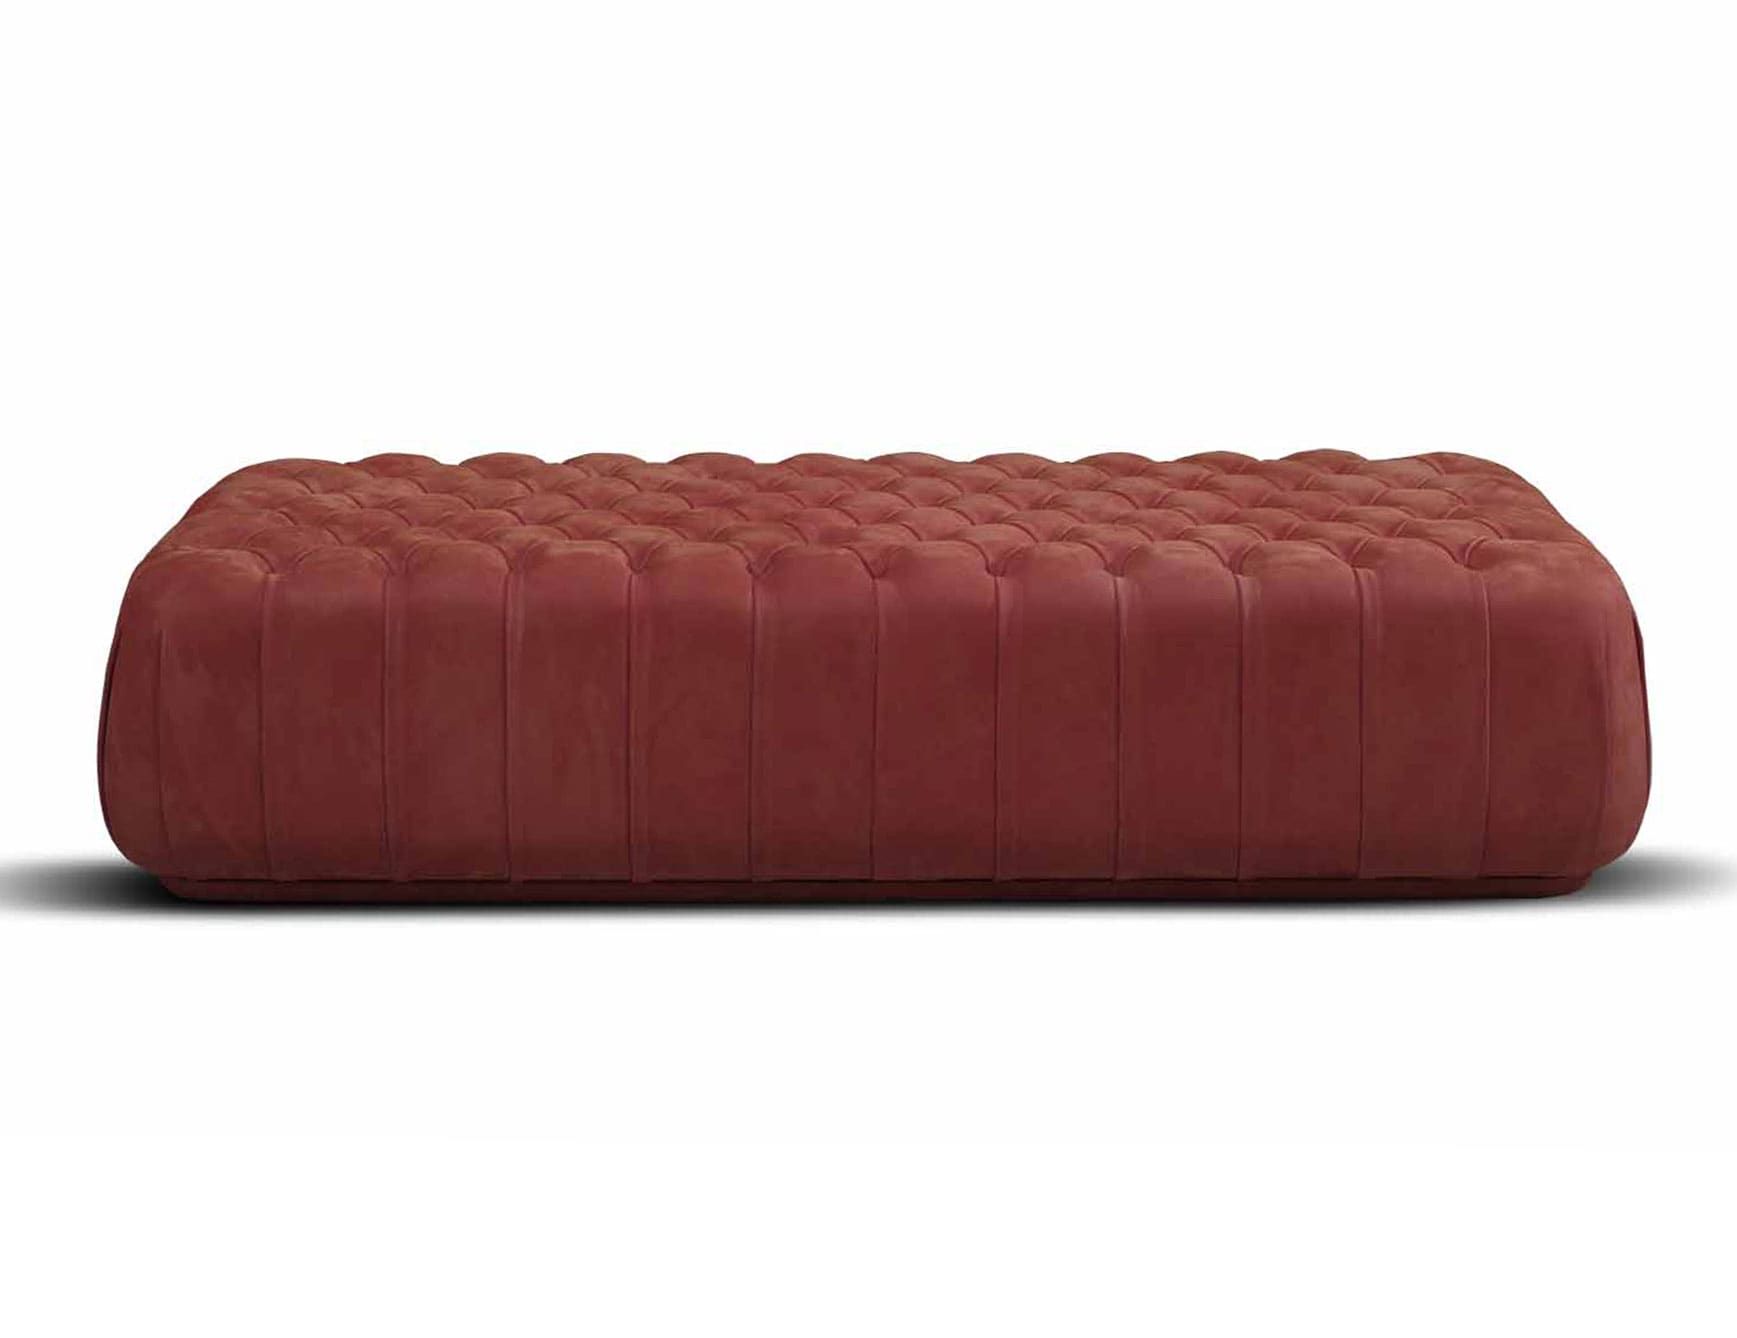 Fly modern Italian ottoman bench with red leather